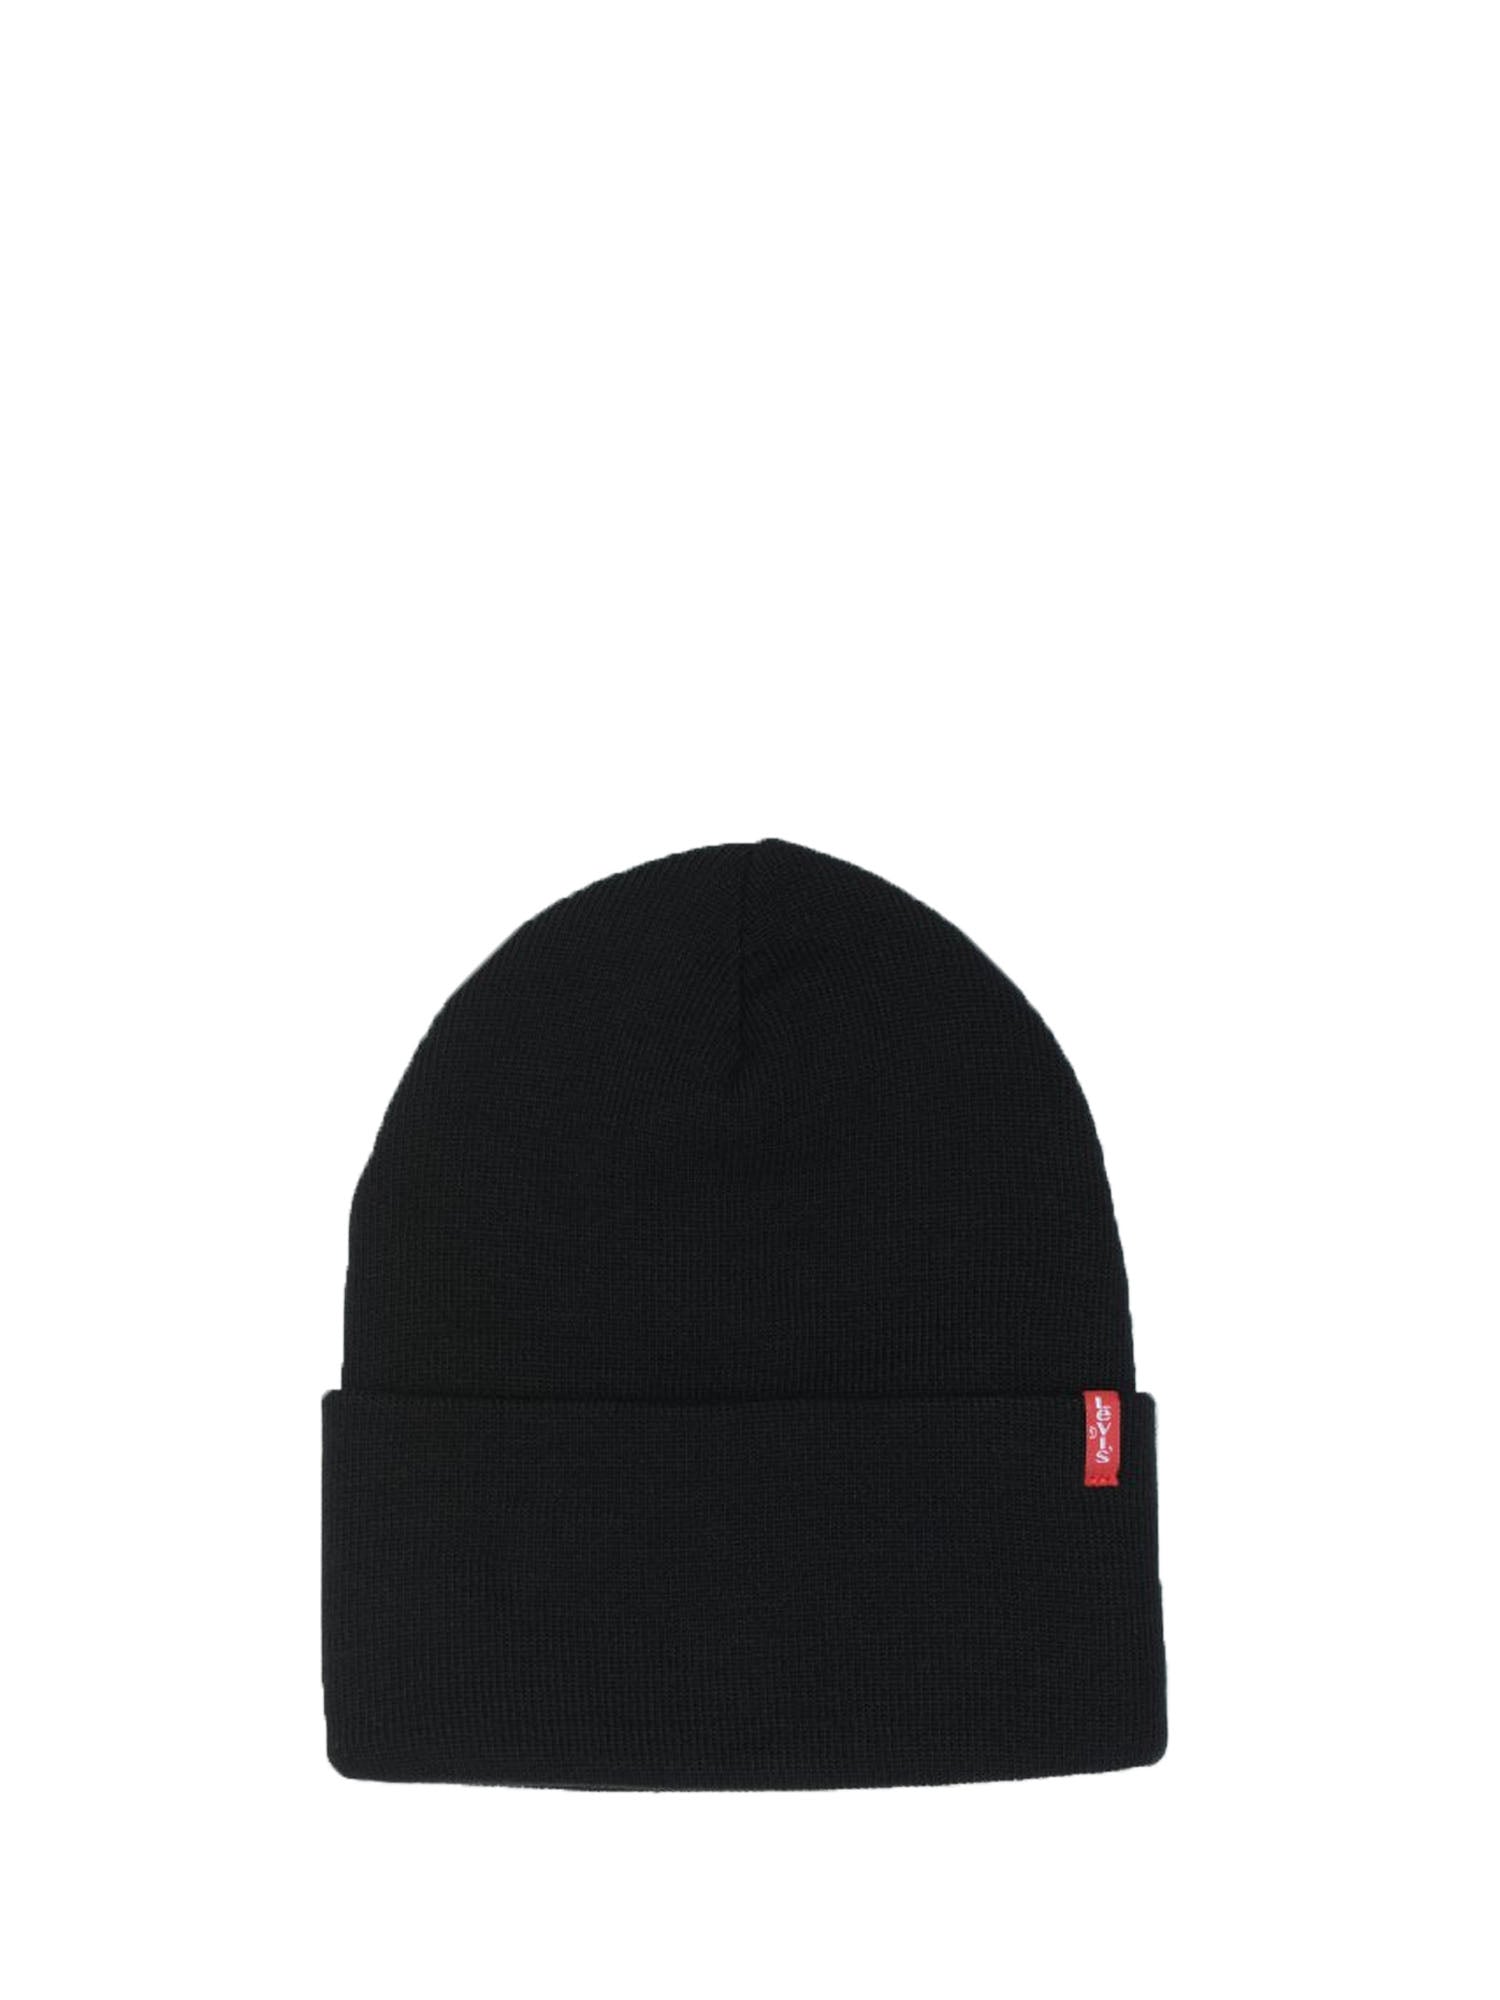 LEVI'S CAPPELLO SLOUCHY RED TAB NERO